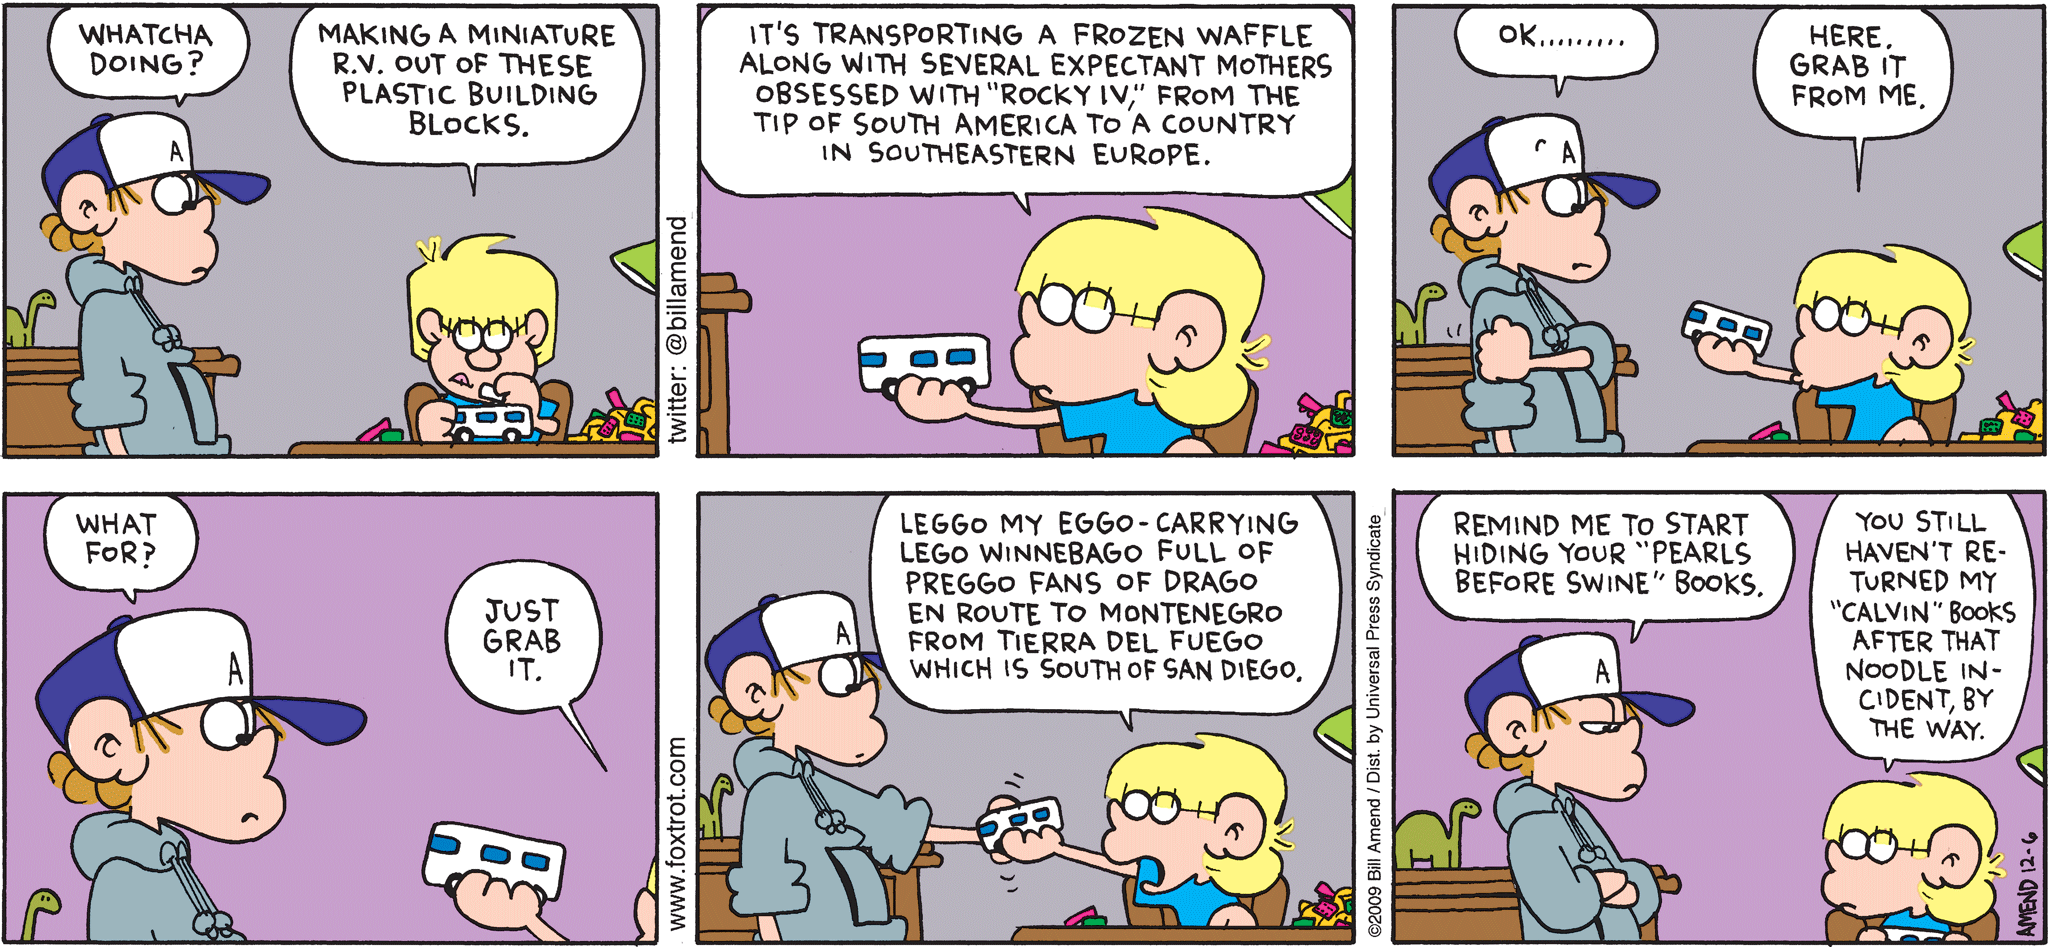 FoxTrot comic strip by Bill Amend - "Punisher" published December 6, 2009 - Peter: Whatcha doing? Jason: Making a miniature R.V. out of these plastic building blocks. It's transporting a frozen waffle along with several expectant mothers obsessed with "Rocky IV", from the tip of South America to a country in Southeastern Europe. Peter: Ok....... Jason: Here. Grab it from me. Peter: What for? Jason: Just grab it. Leggo my Eggo-carrying Lego winnebago full of preggo fans of Drago en route to Montenegro frome Tierra del Fuego which is south of Sand Diego. Peter: Remind me to start hiding your "Pearls Before Swine" books. Jason: You still haven't returned my "Calvin" books after that noodle incident, by the way.